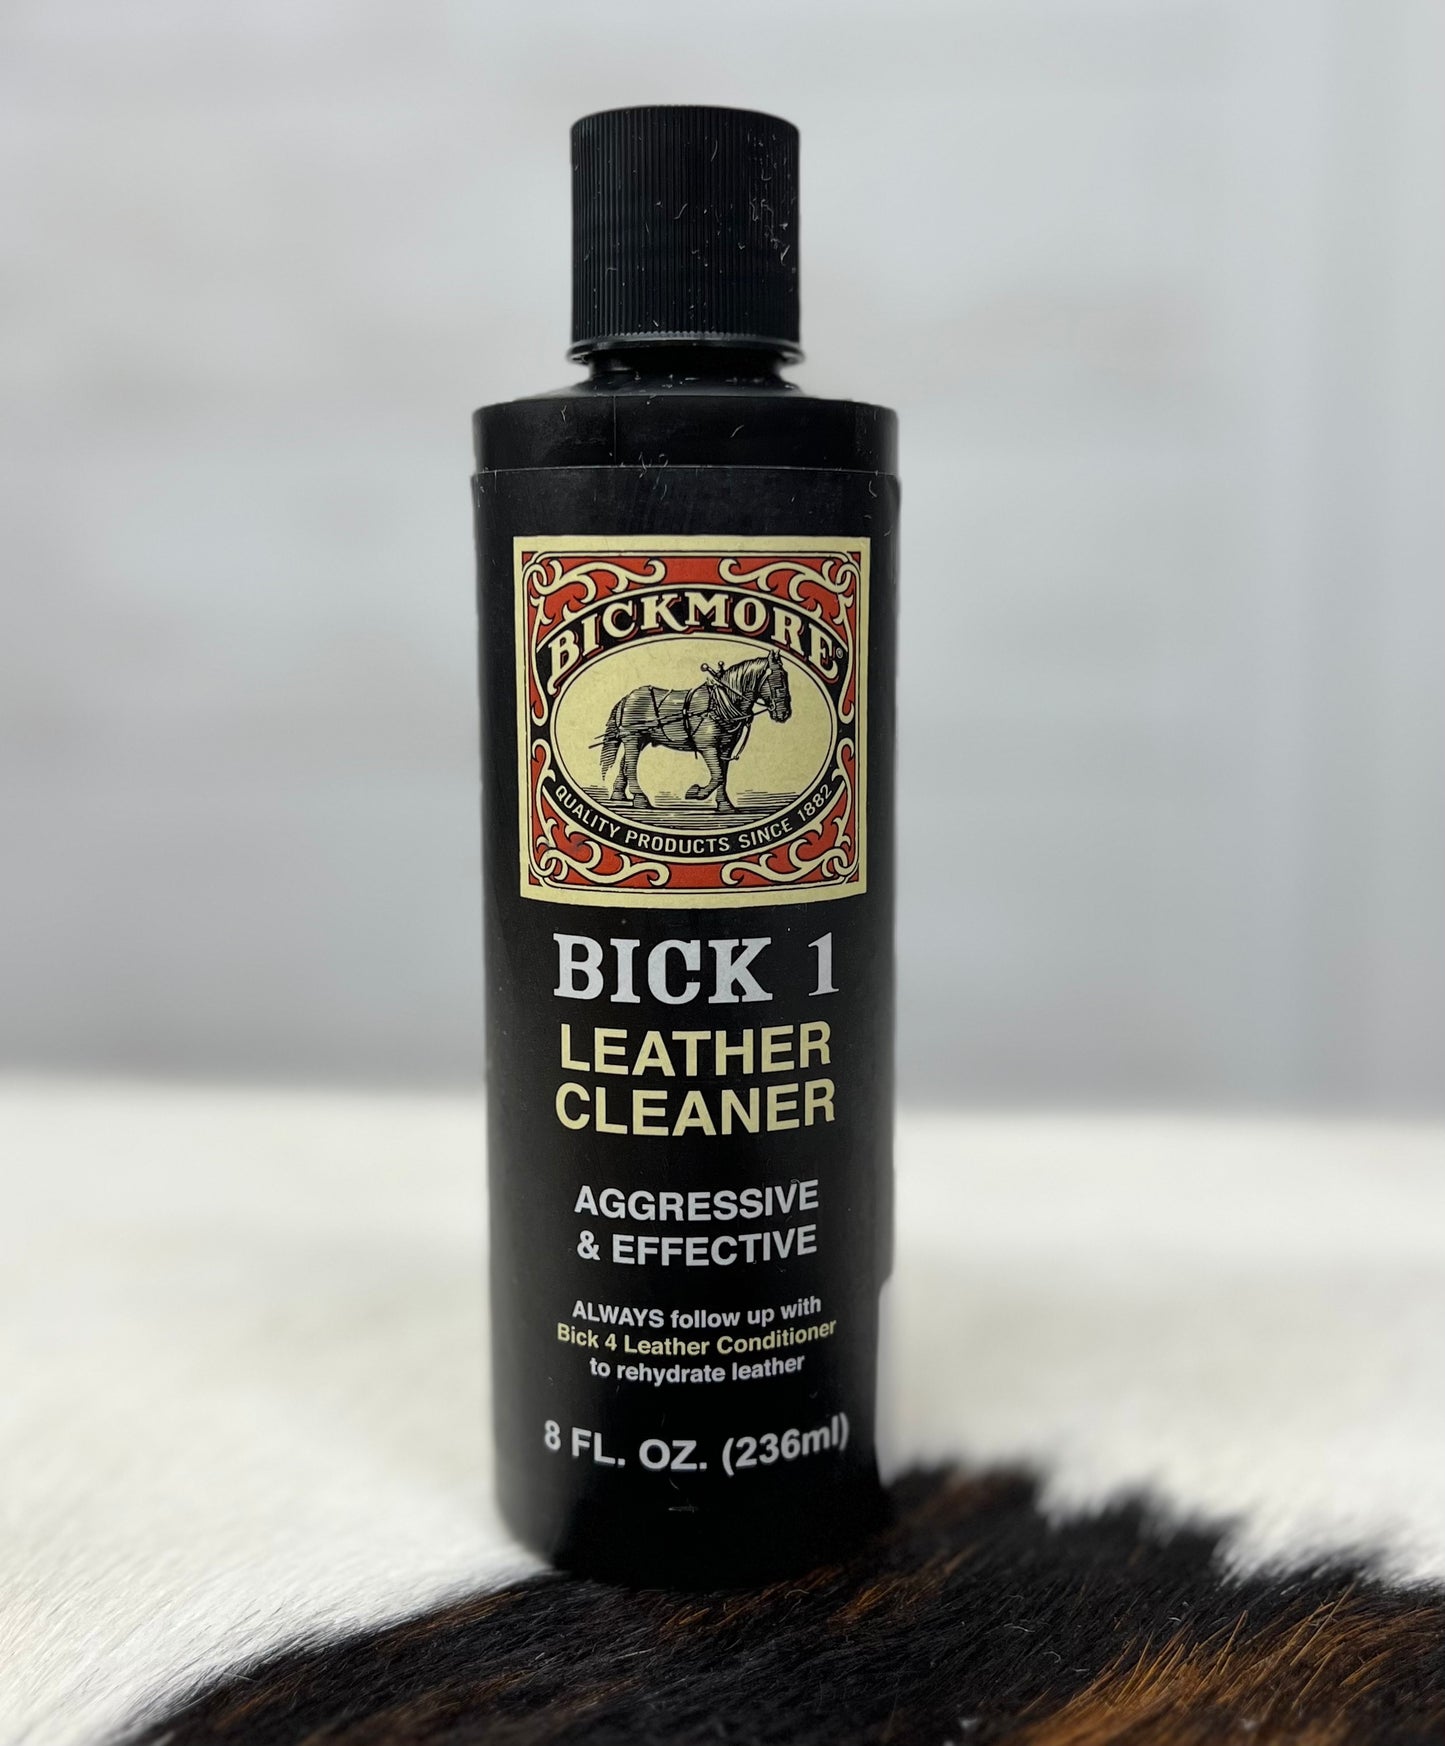 Bick-1 Leather Cleaner